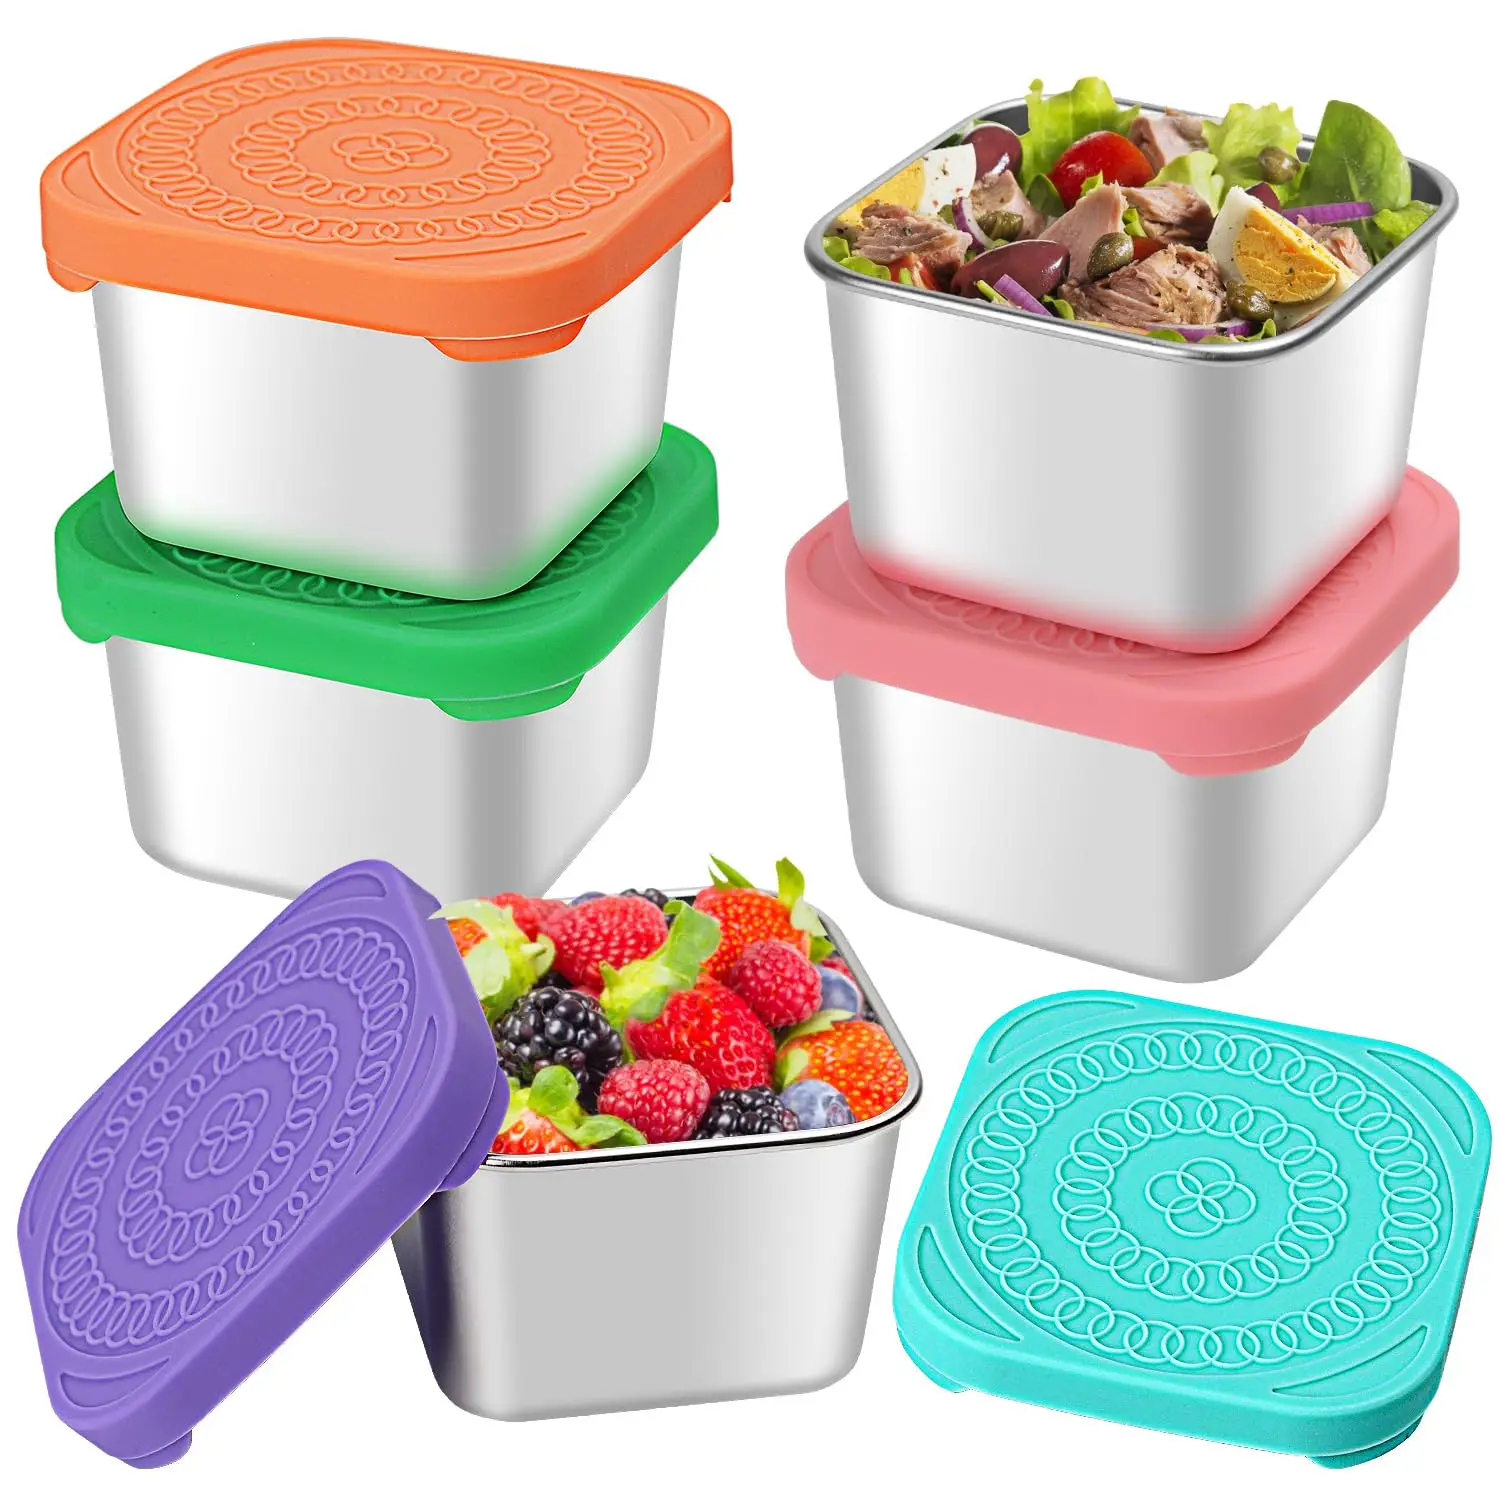 https://ae01.alicdn.com/kf/S1bf00871471b4c35aa4f22a08a9f4d2bT/6oz-Stainless-Steel-Snack-Containers-Small-Metal-Food-Storage-Container-with-Silicone-Lids-Leakproof-Snack-Lunch.jpg